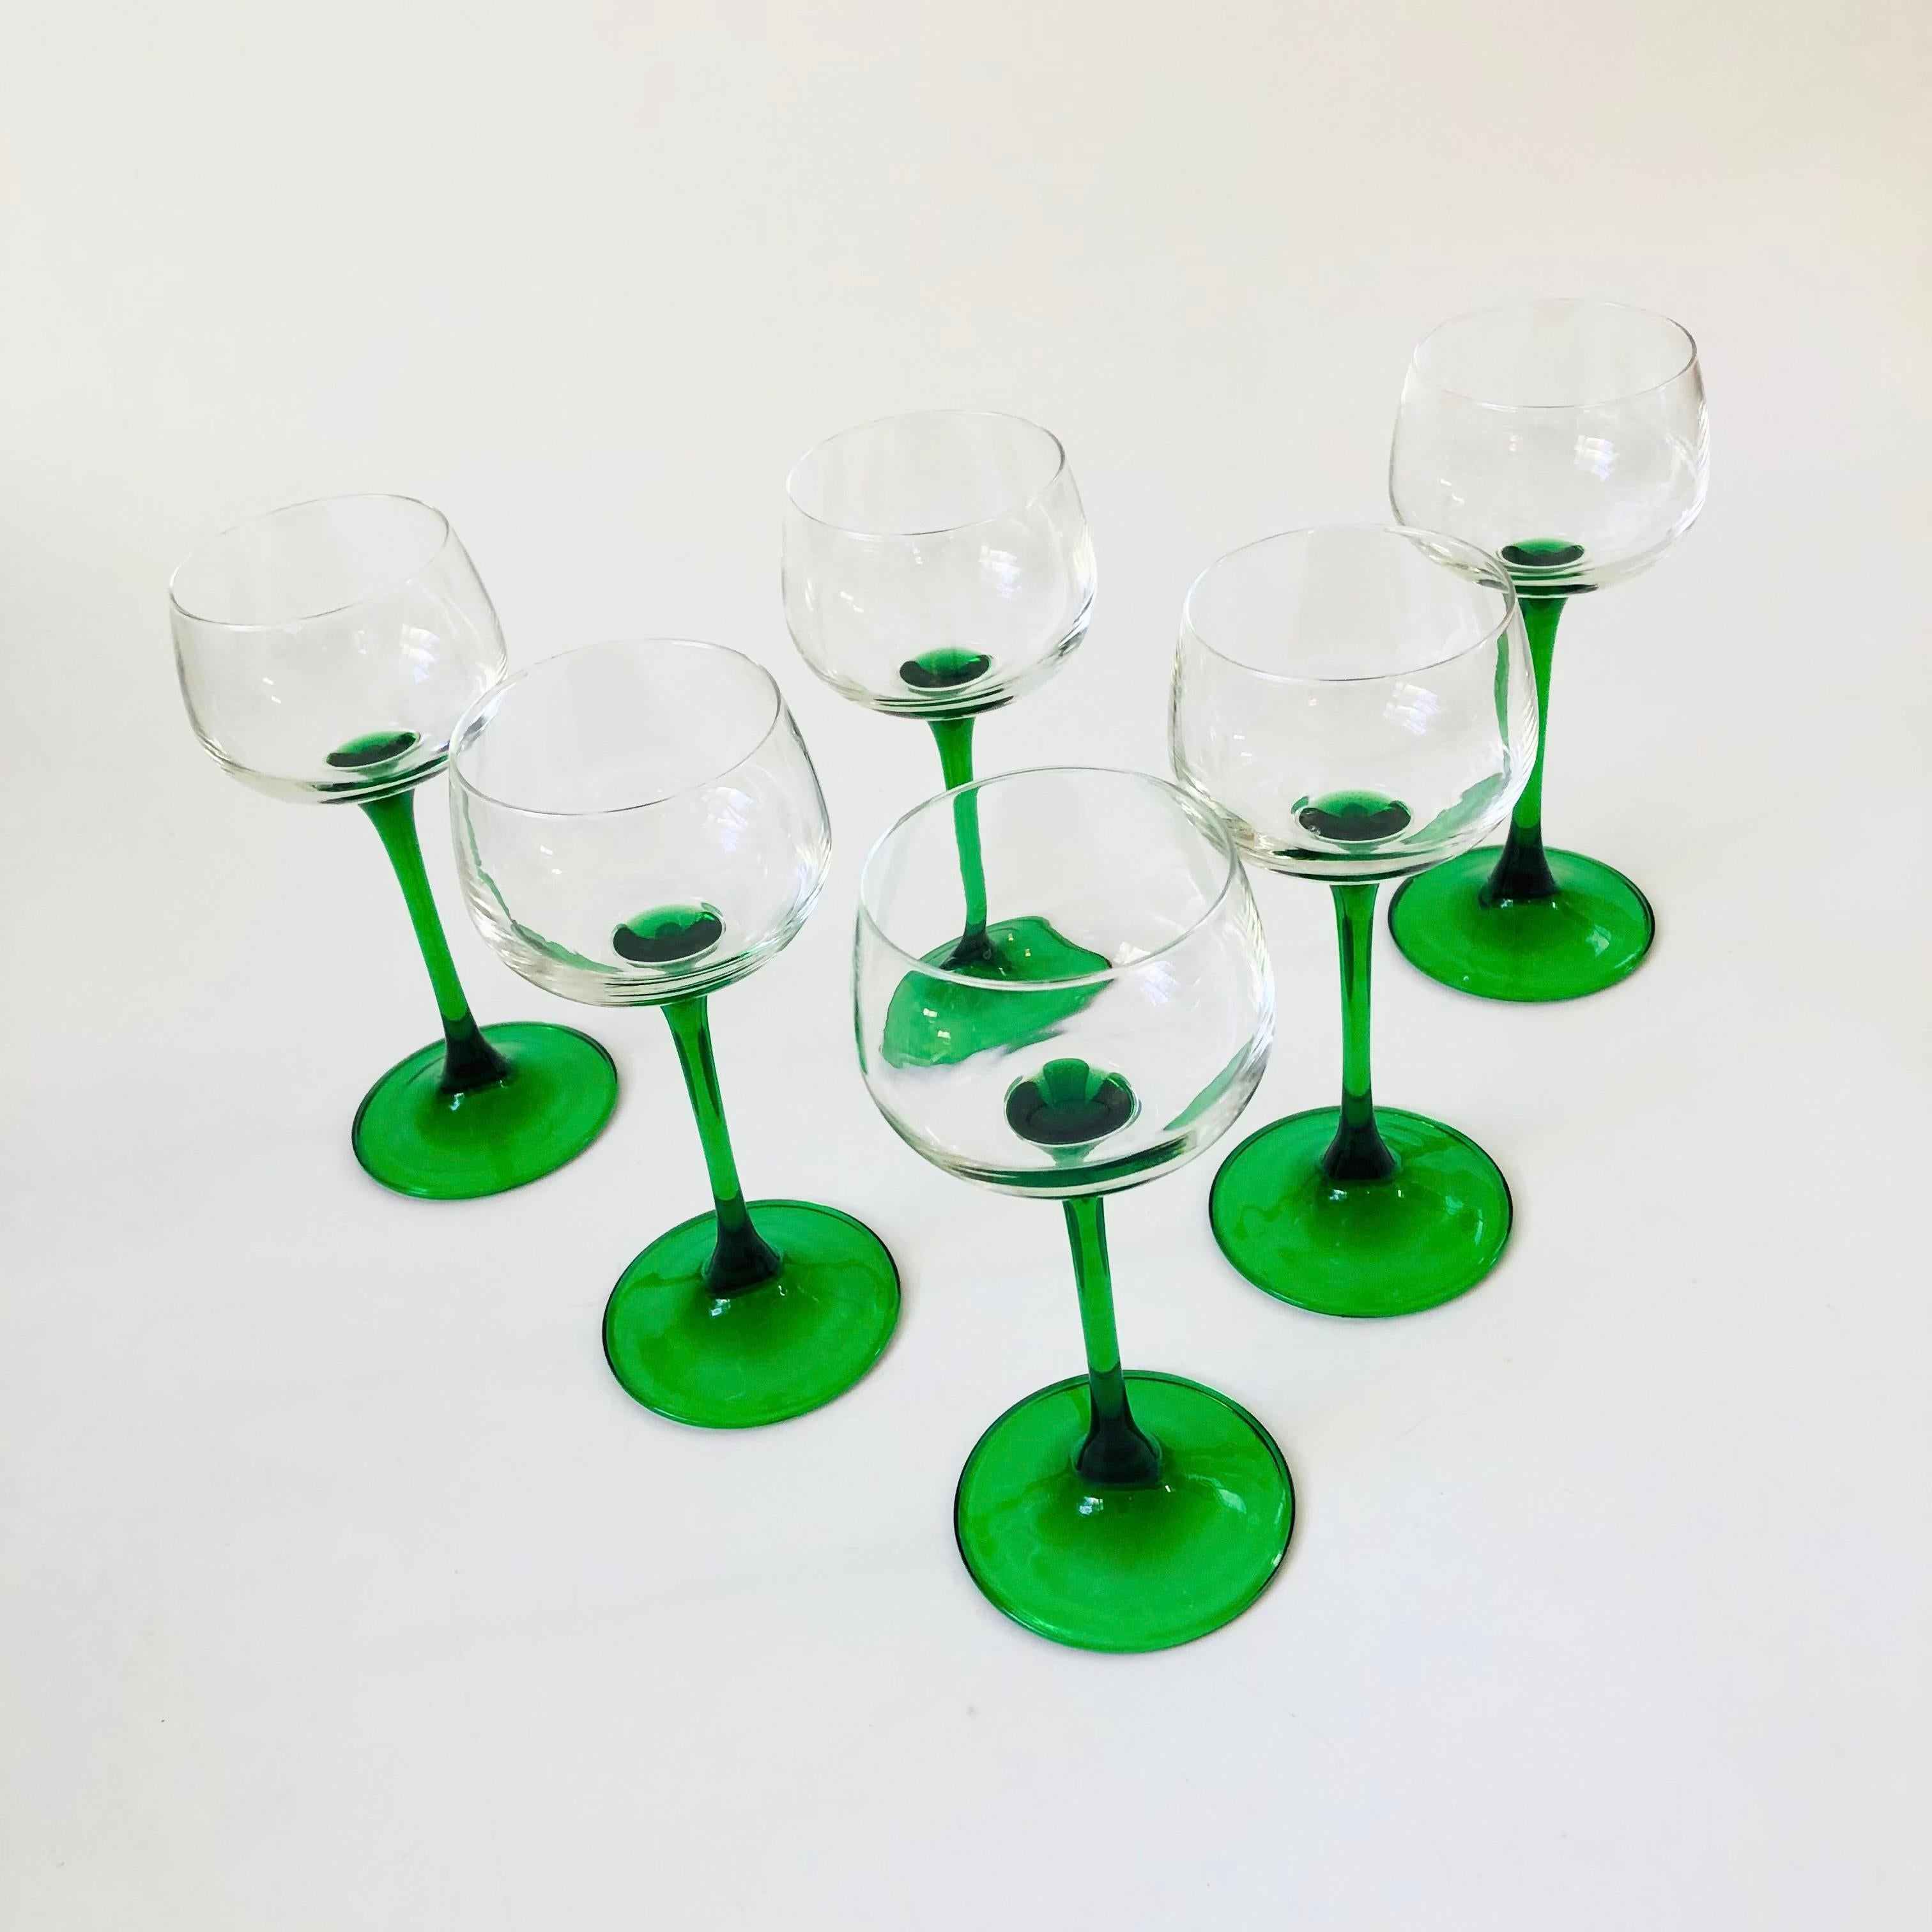 An elegant of set of 6 vintage coupe glasses with green stems. Perfect for champagne. Made in France by Luminarc.

